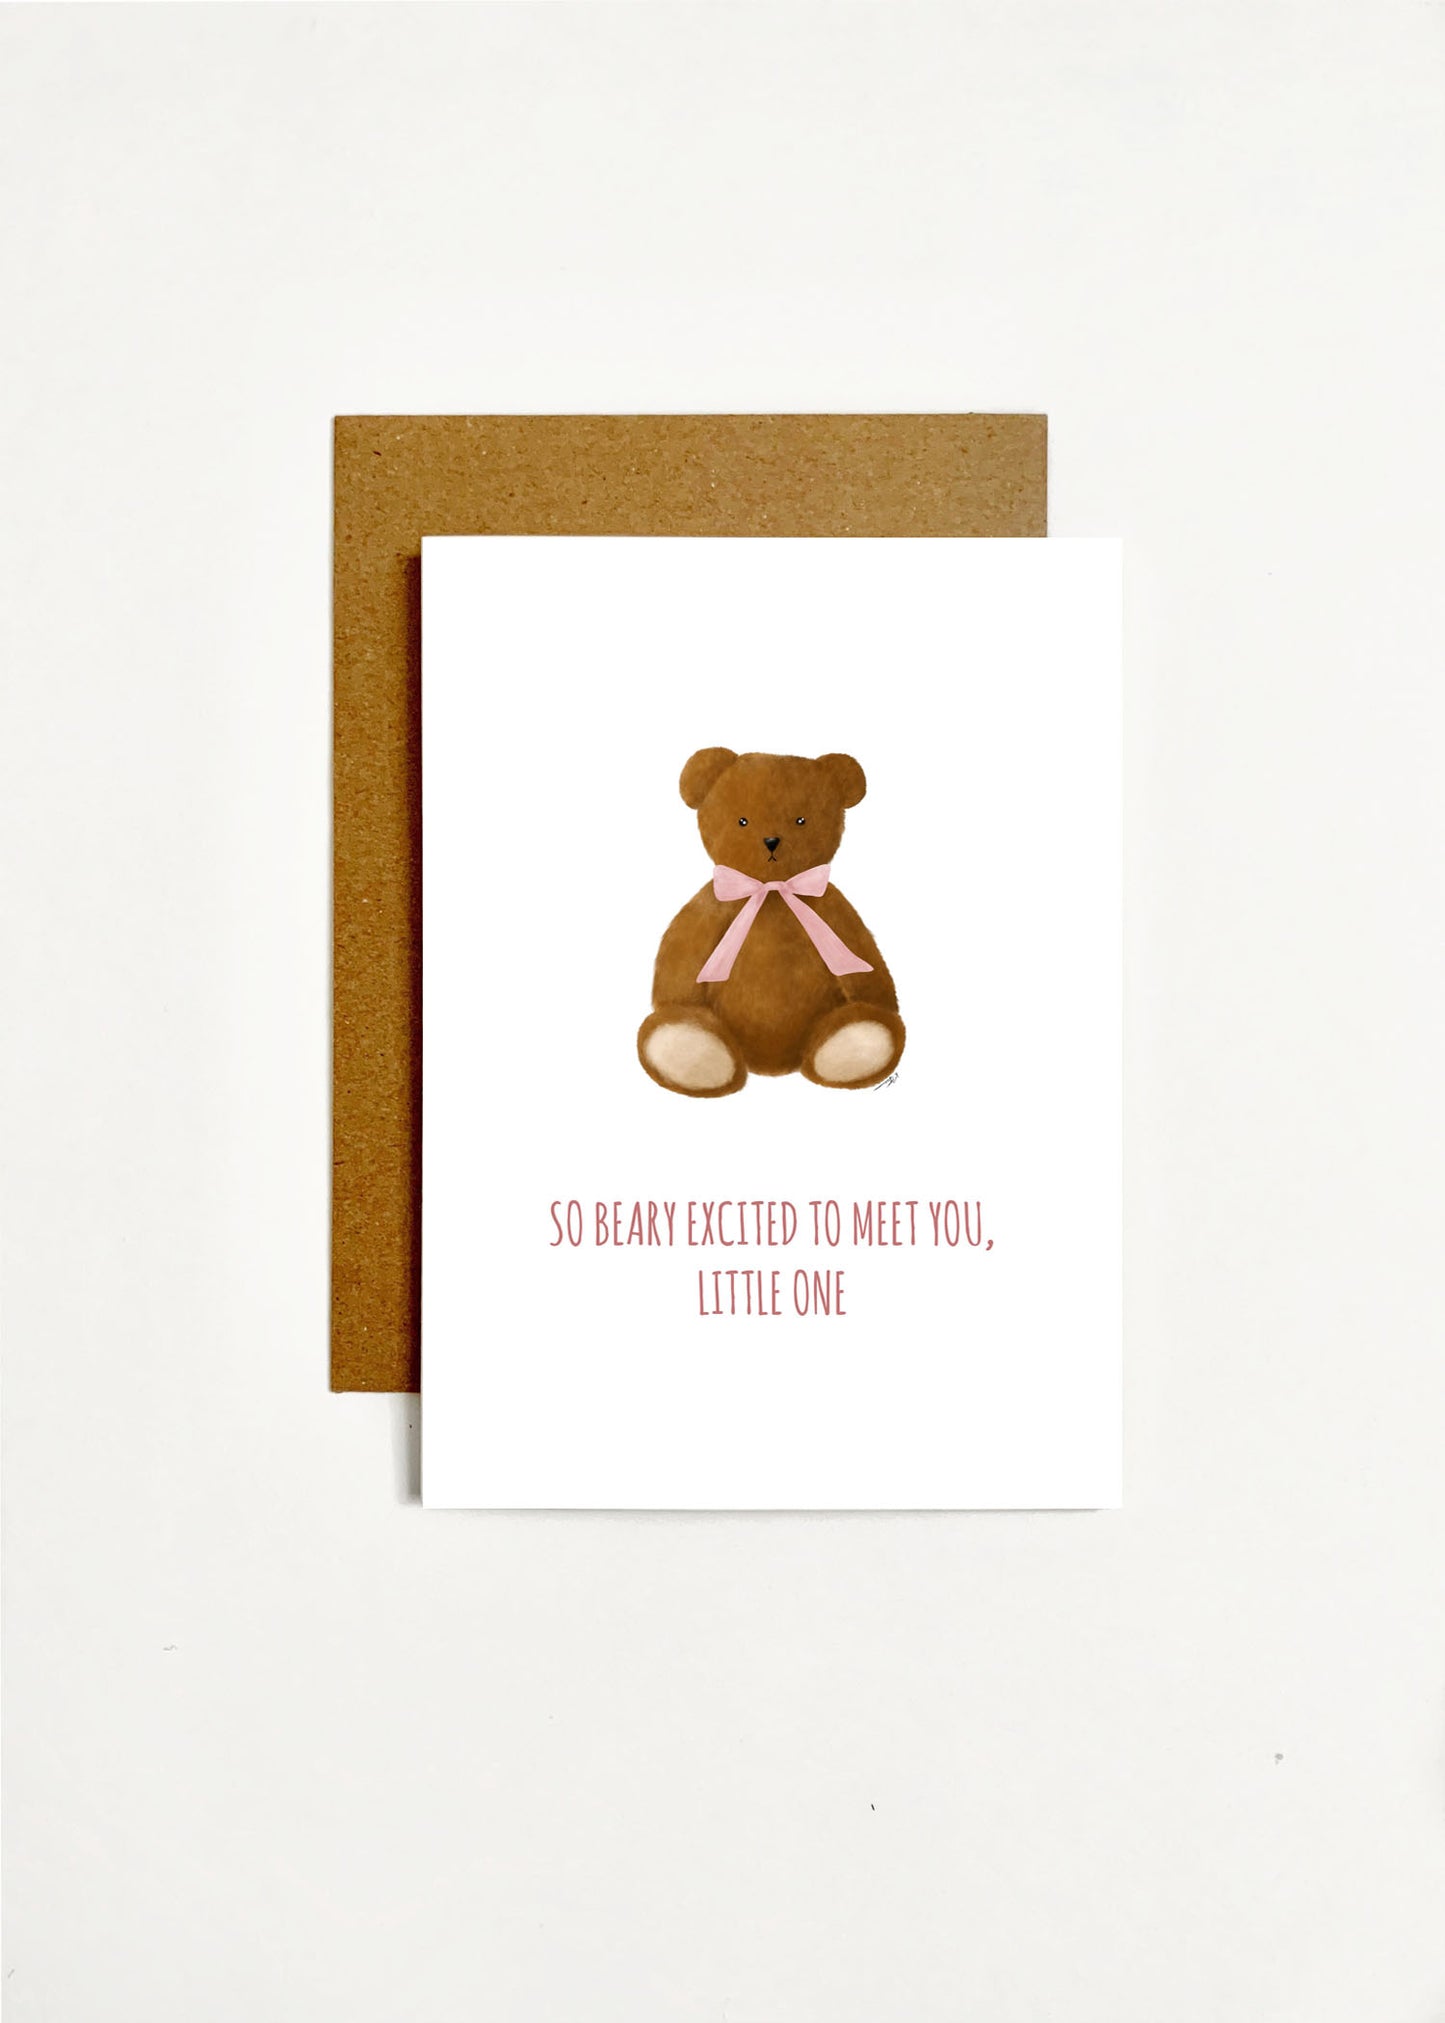 So Beary Excited To Meet You, Little One - Pink Ribbon